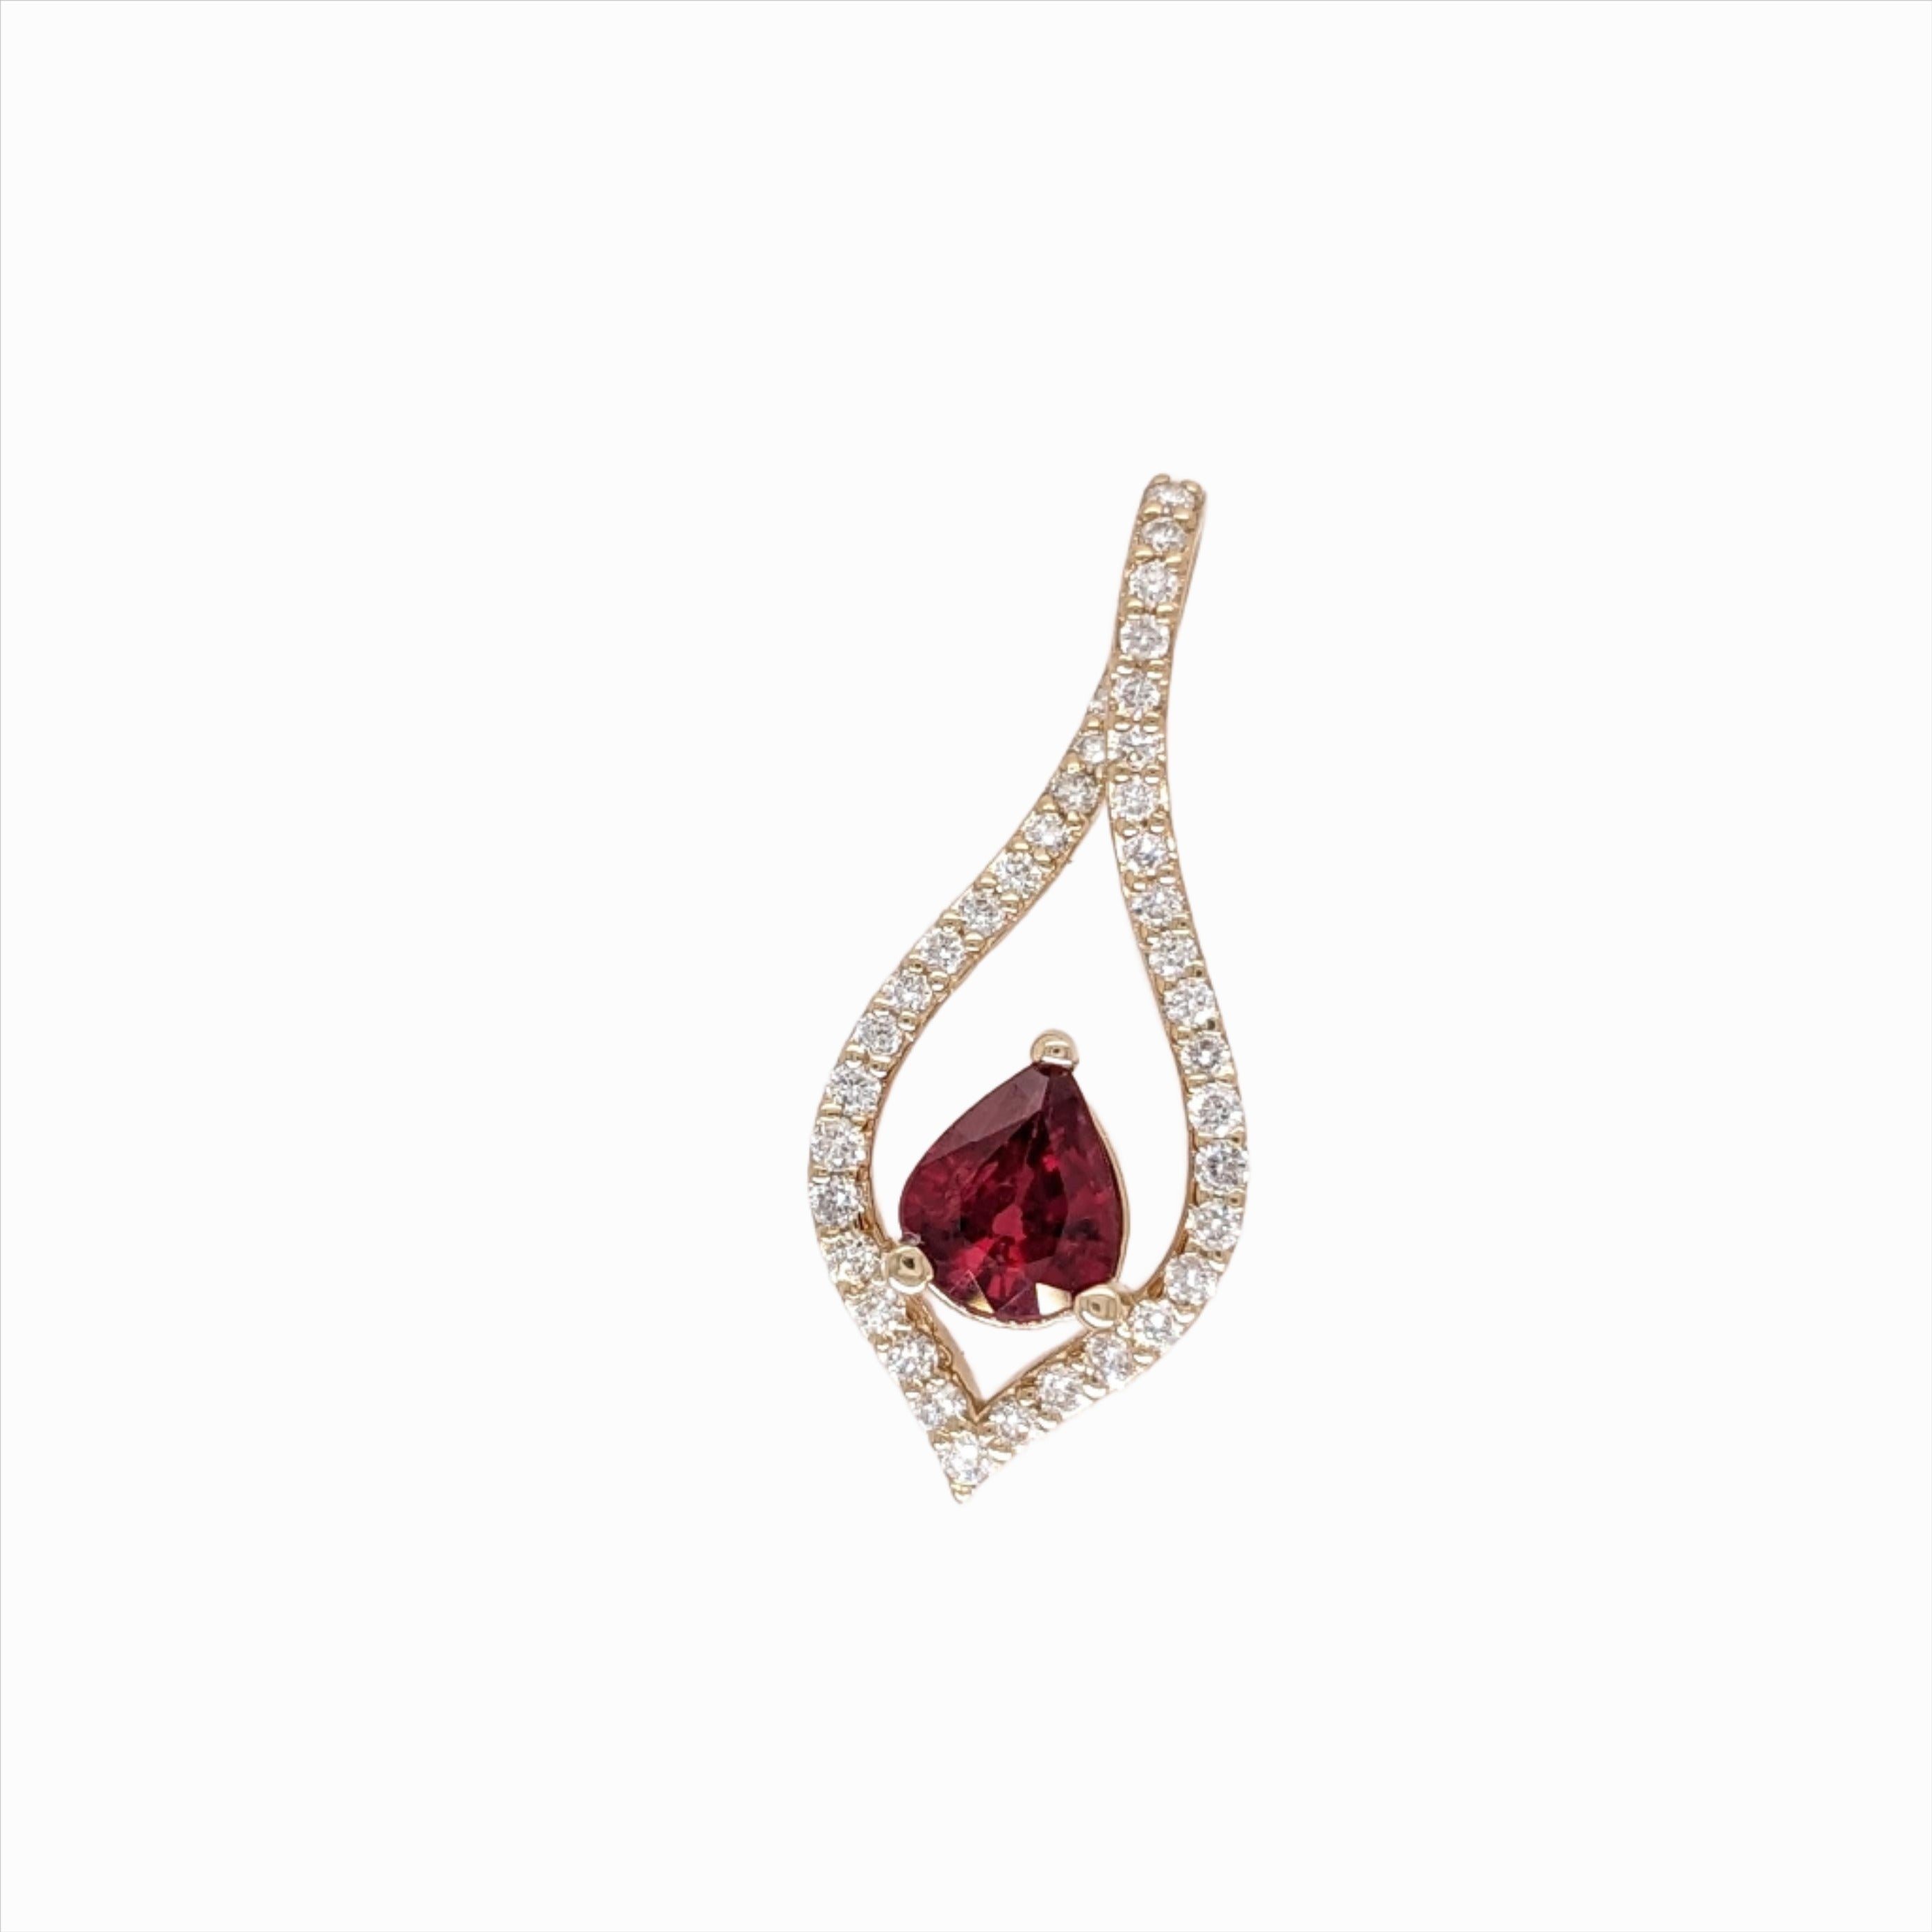 Ruby Pendant w Natural Diamonds in Solid 14K Yellow Gold Pear Shape 6x5mm